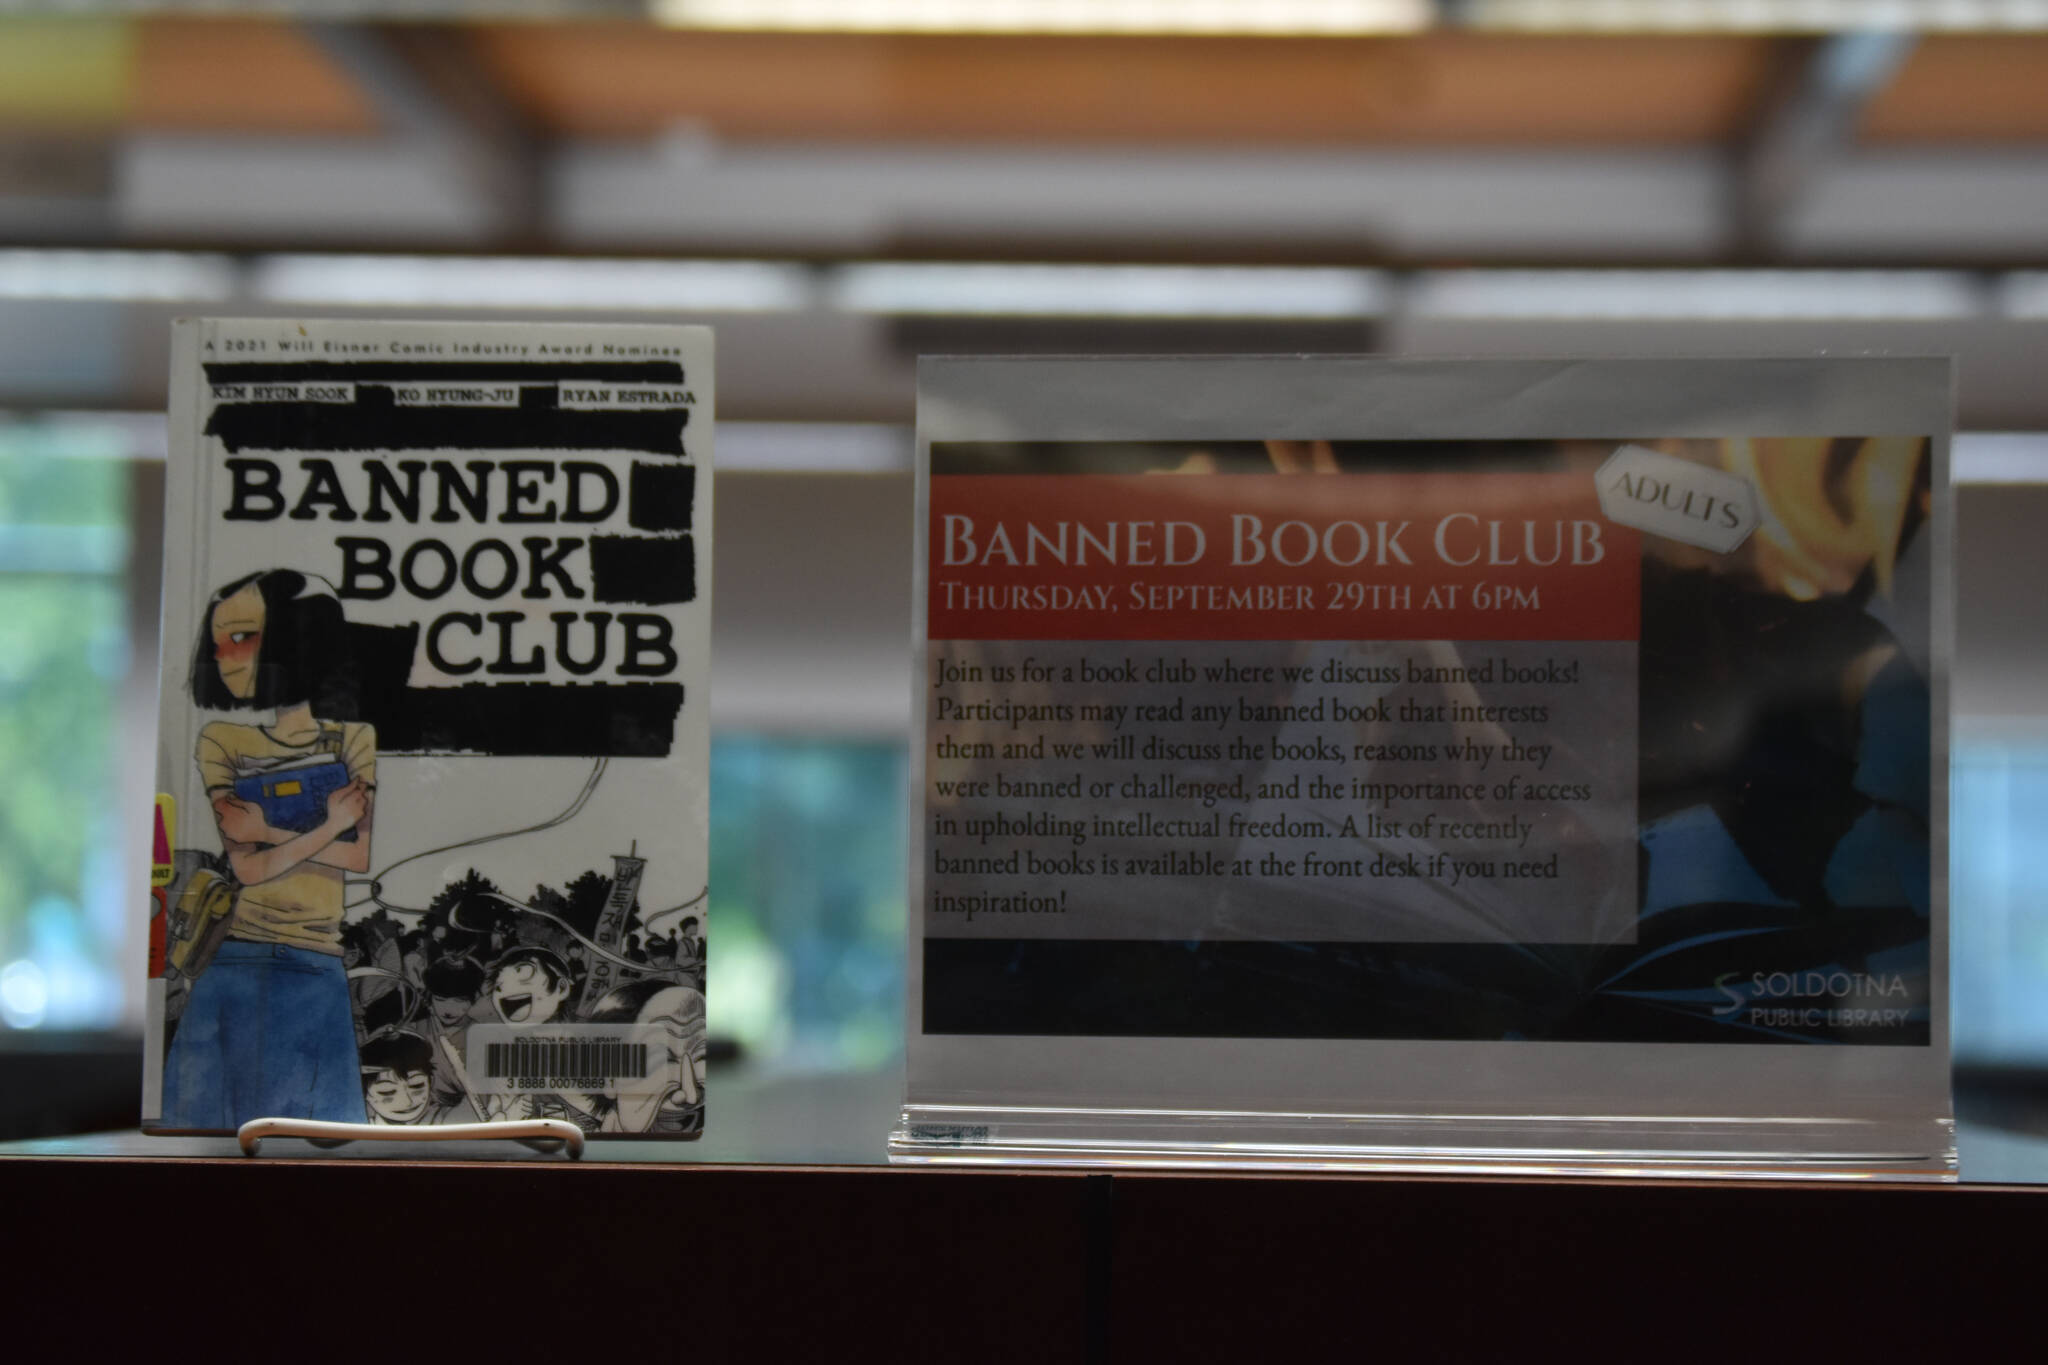 A sign promoting Banned Book Club is seen on Saturday, Sept. 24, 2022, at the Soldotna Public Library in Soldotna, Alaska. (Jake Dye/Peninsula Clarion)